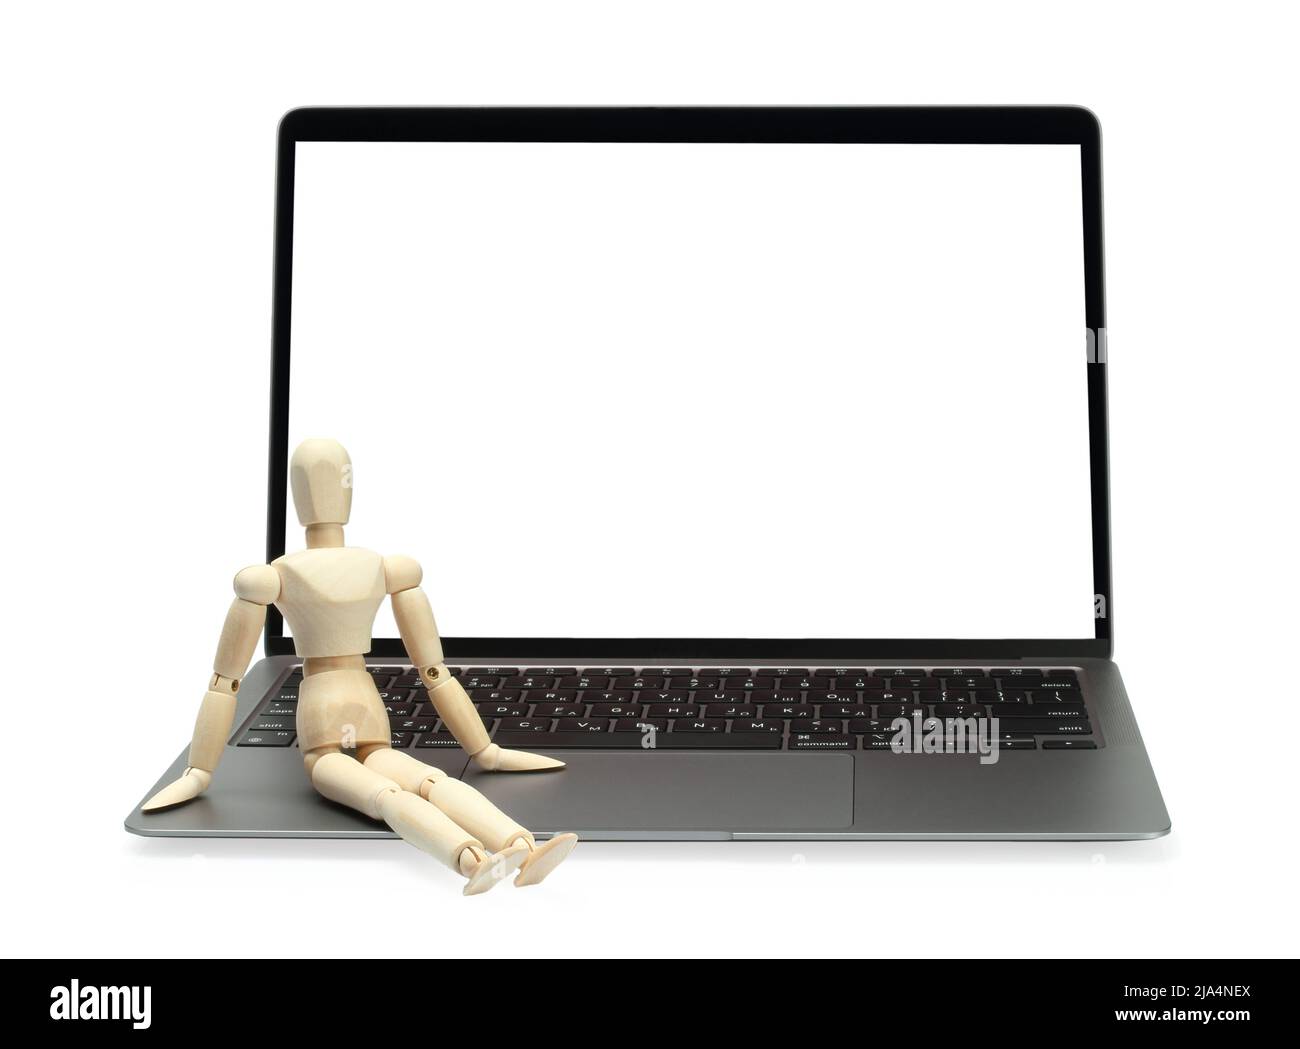 Laptop with blank screen and wooden manikin, on white background close-up Stock Photo